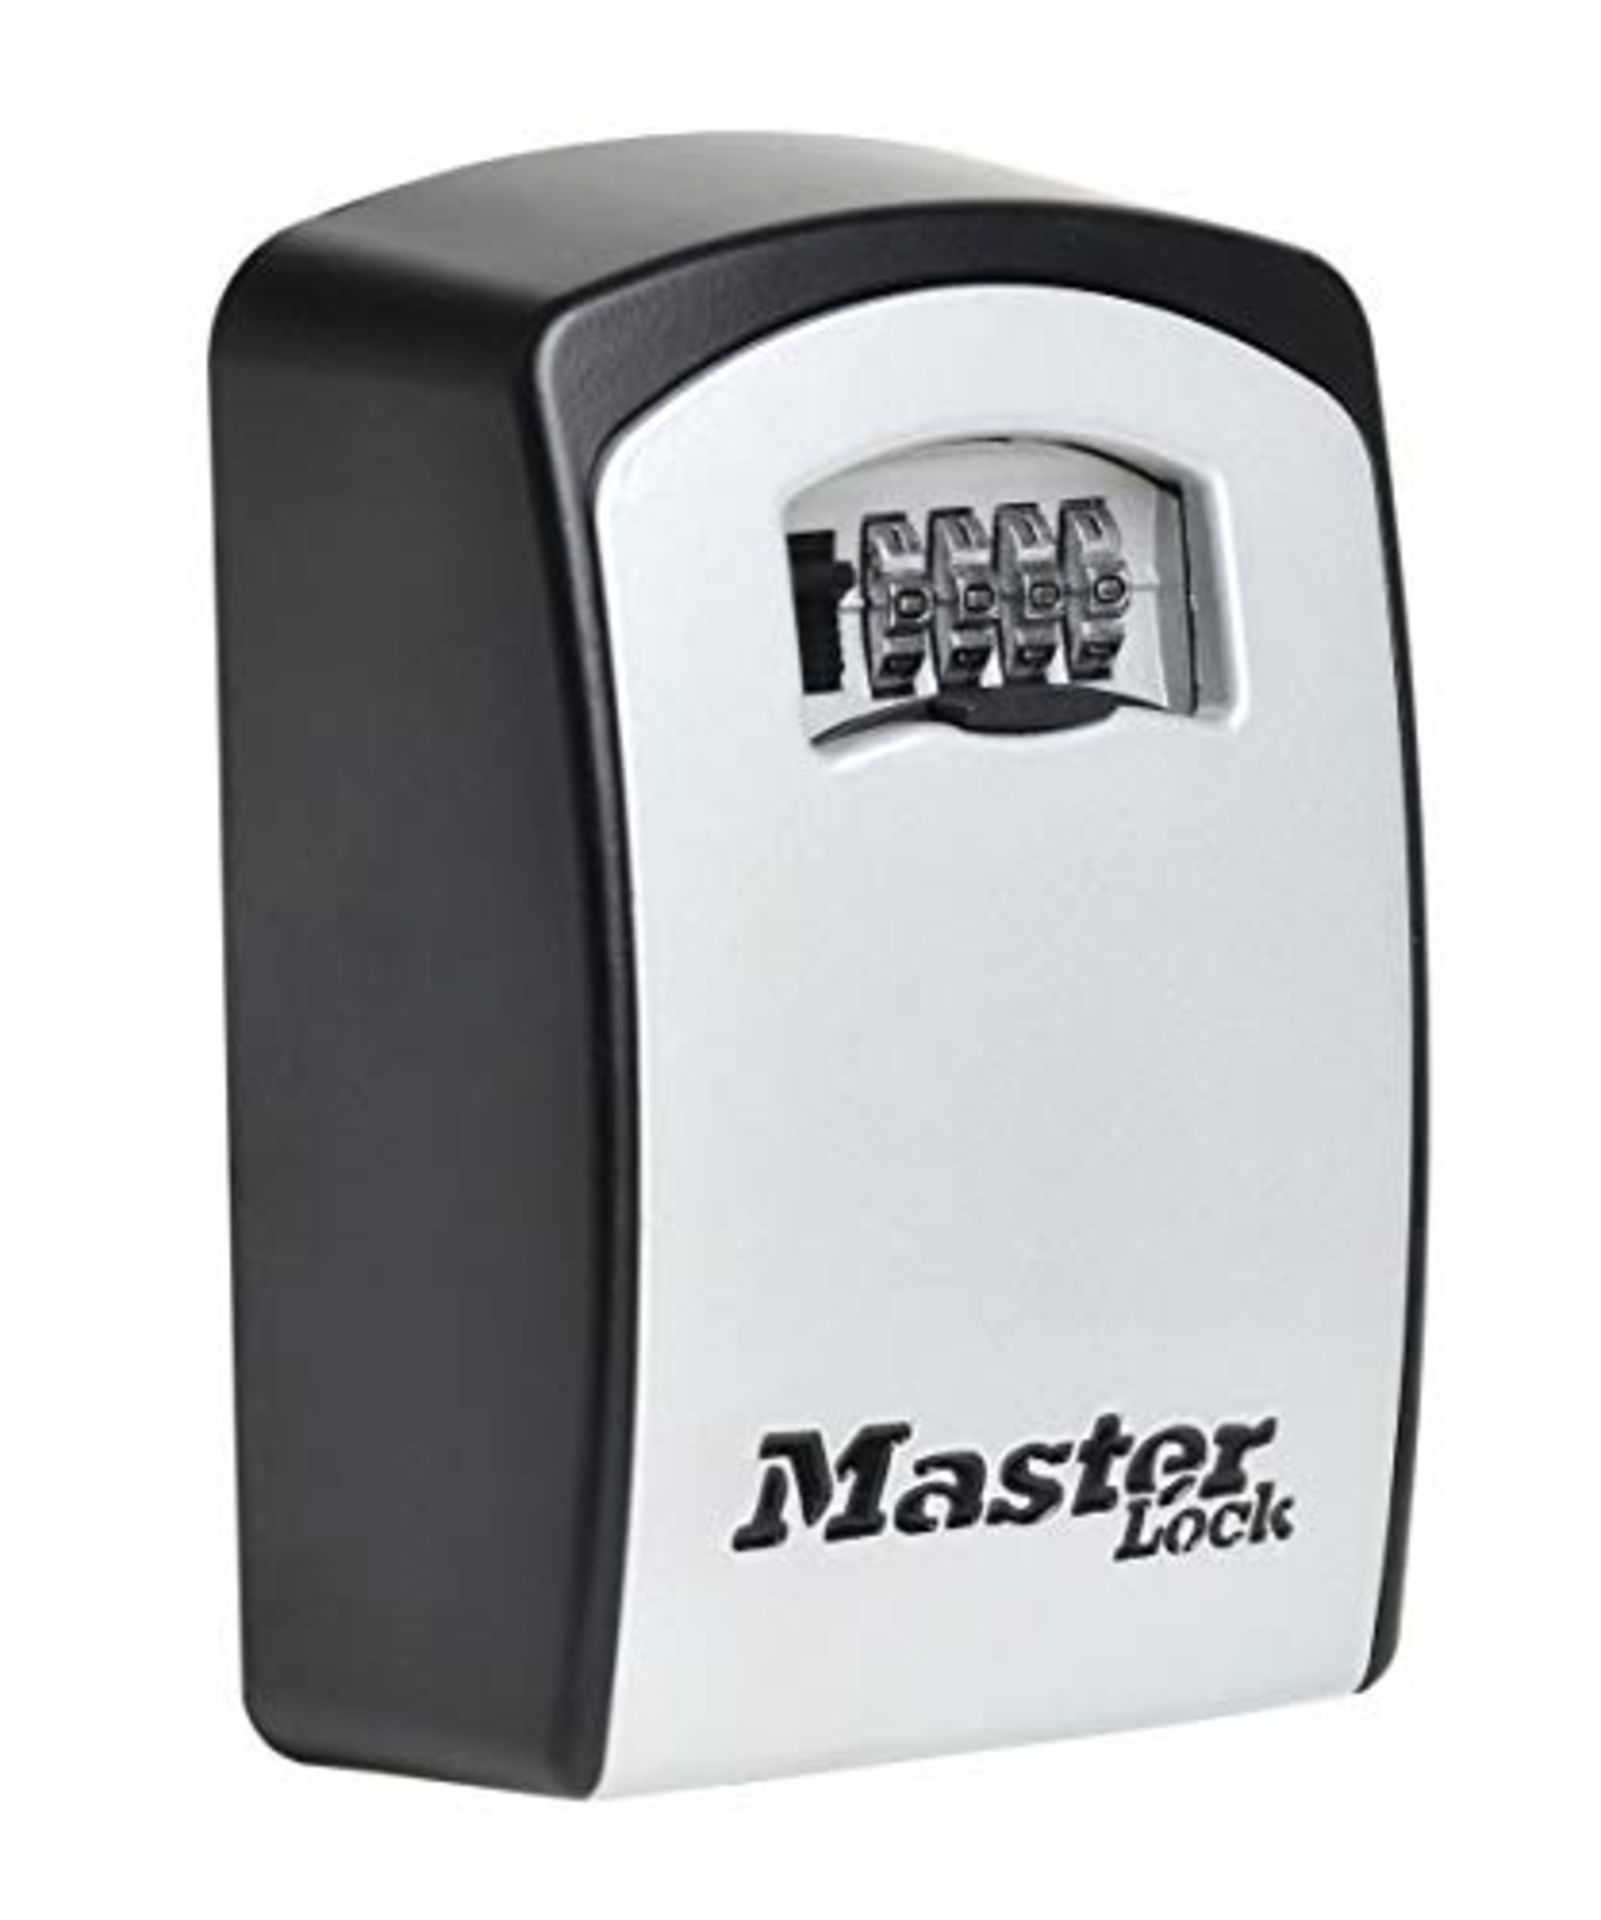 MASTER LOCK Extra Large Key Safe Wall Mounted, XL 106 x 146 x 53 mm, Outdoor, Mounting